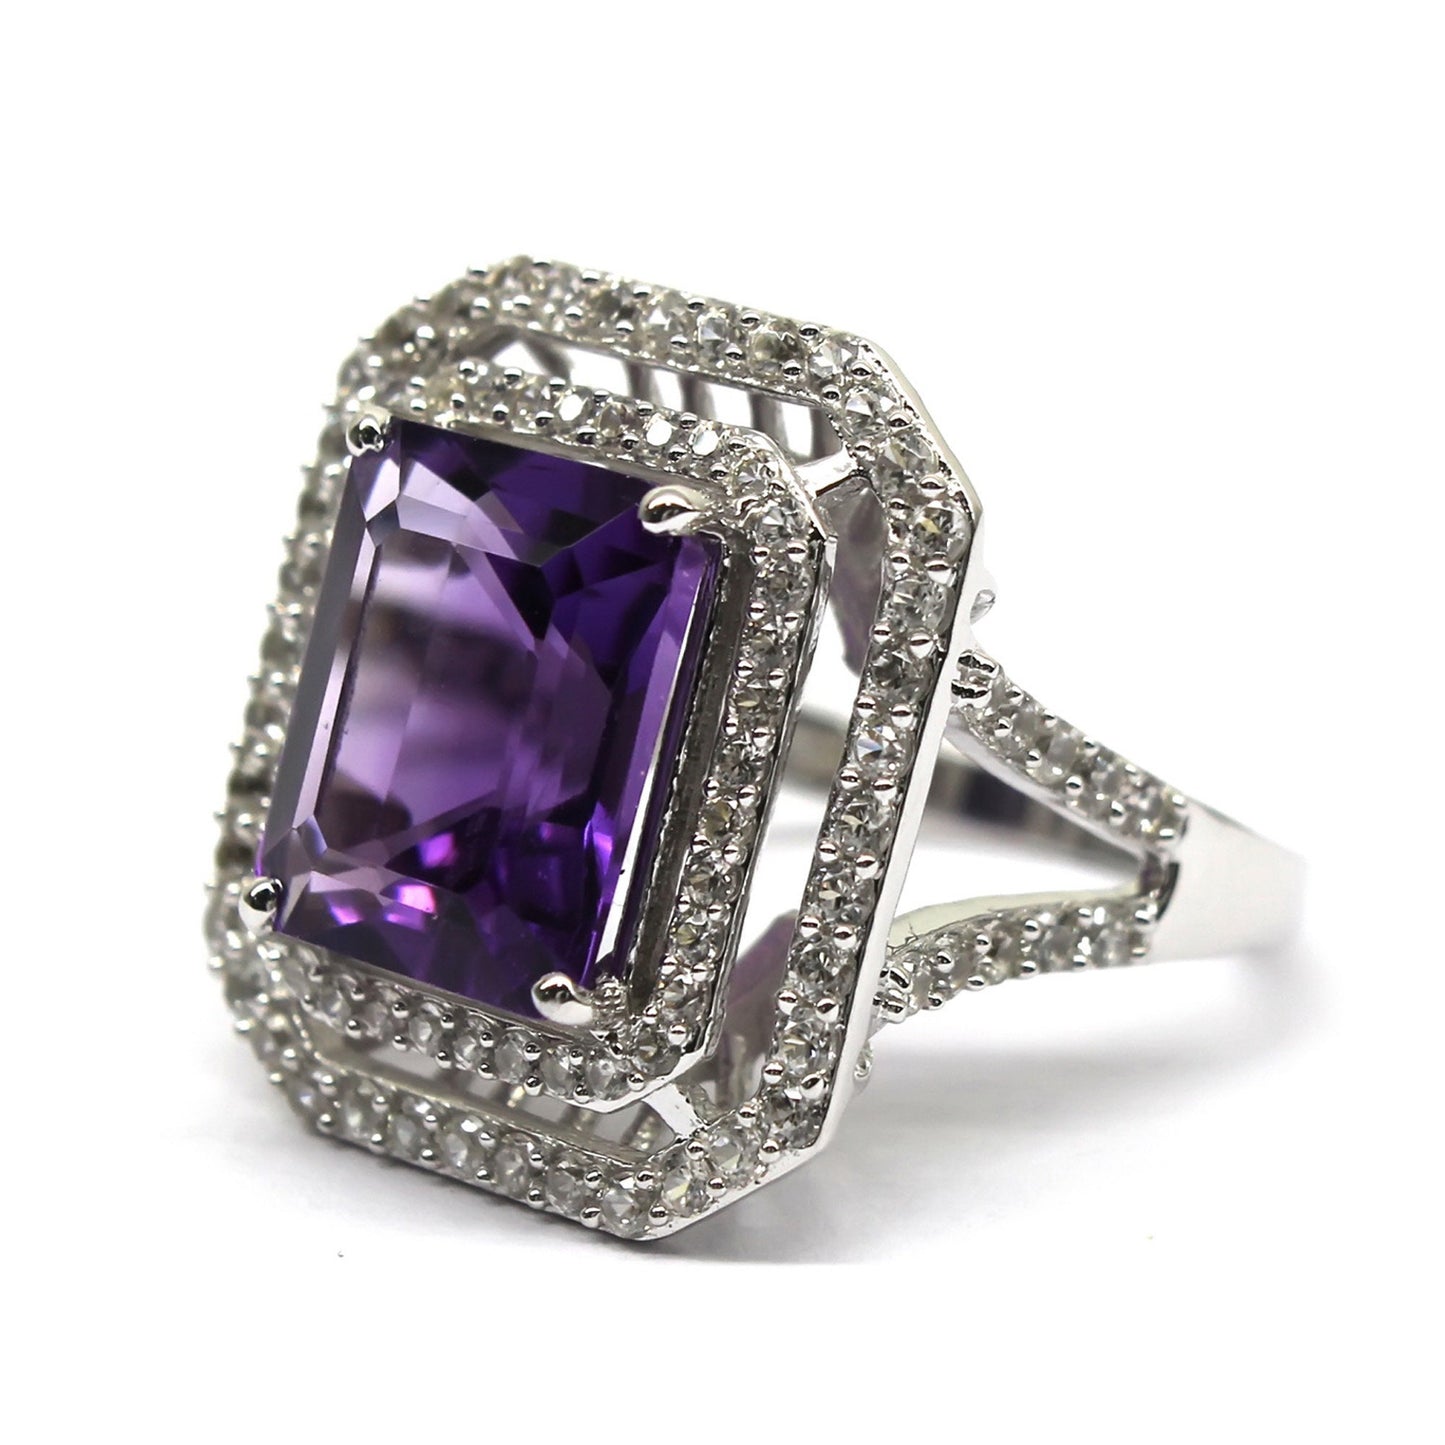 Natural African Amethyst With White Zircon Gemstone Ring 925 Sterling Silver Ring Boho Ring For Women Fine Jewelry Gift For Her